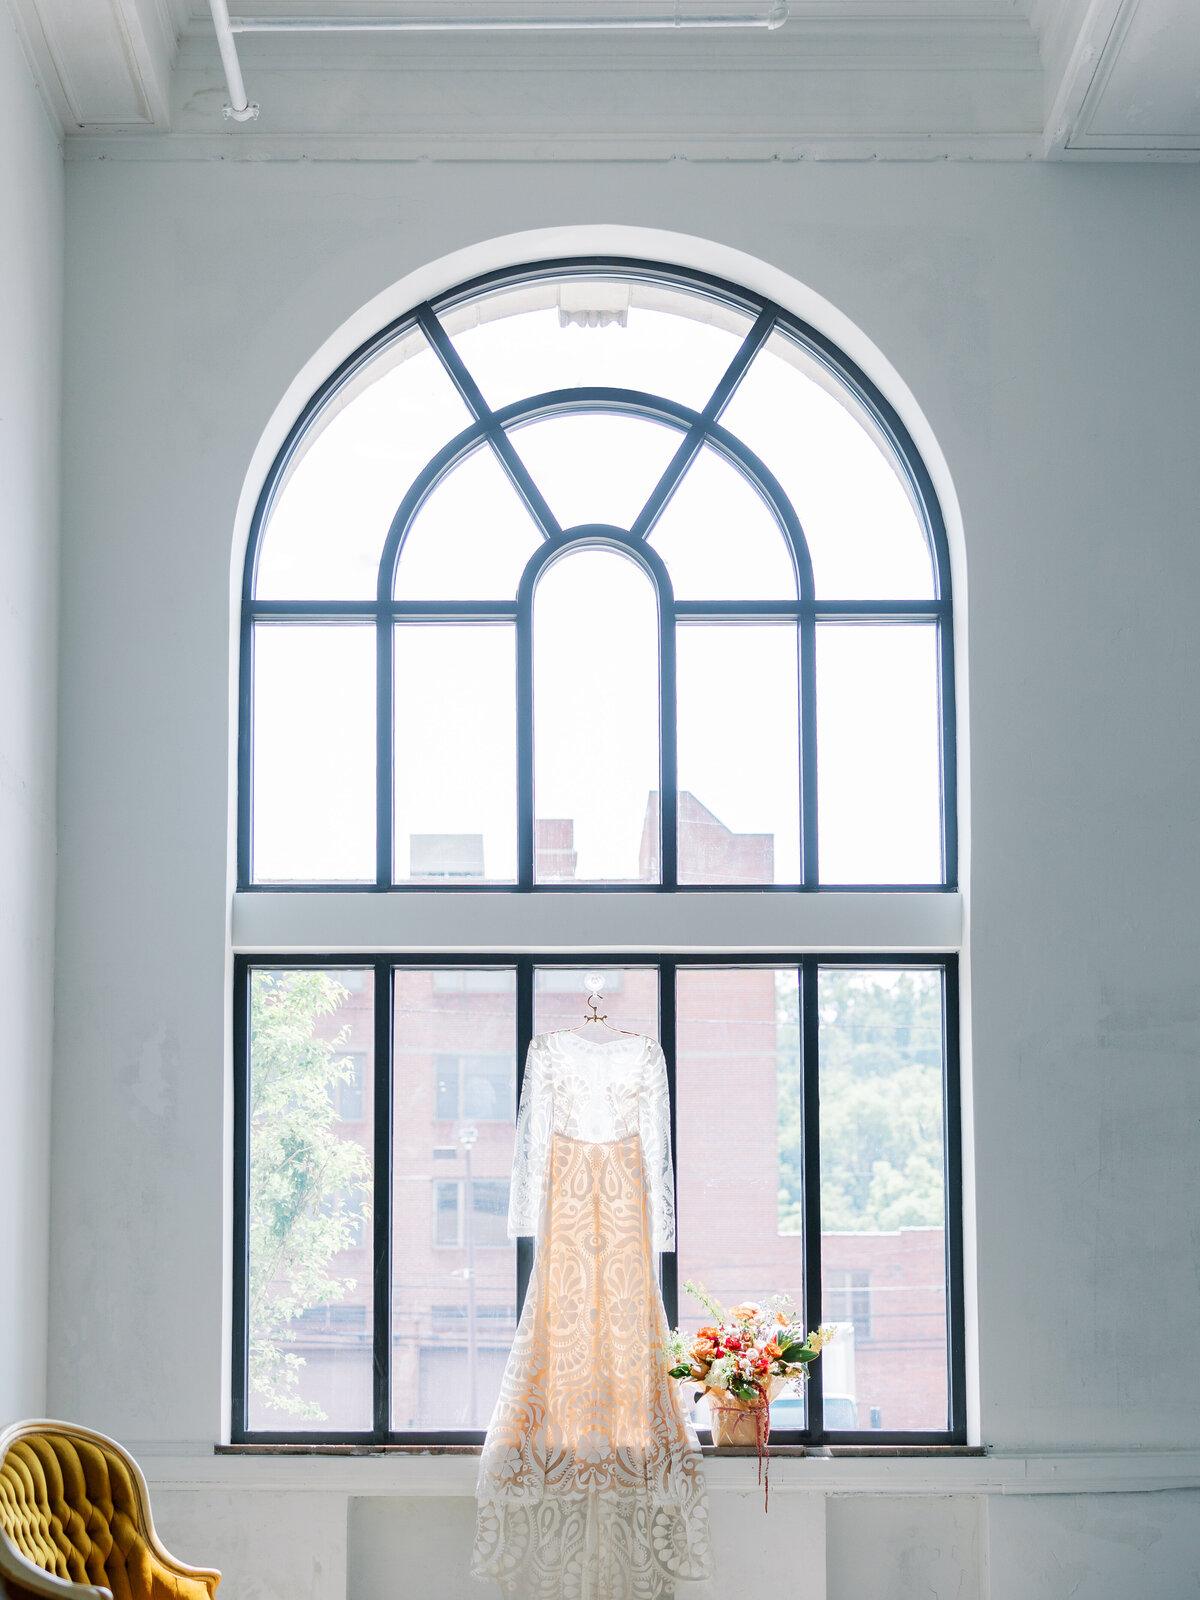 Anne-Troxel-Photography-Pittsburgh-Wedding-Franklin-On-Penn-Bakers-Connection_2027_Edit